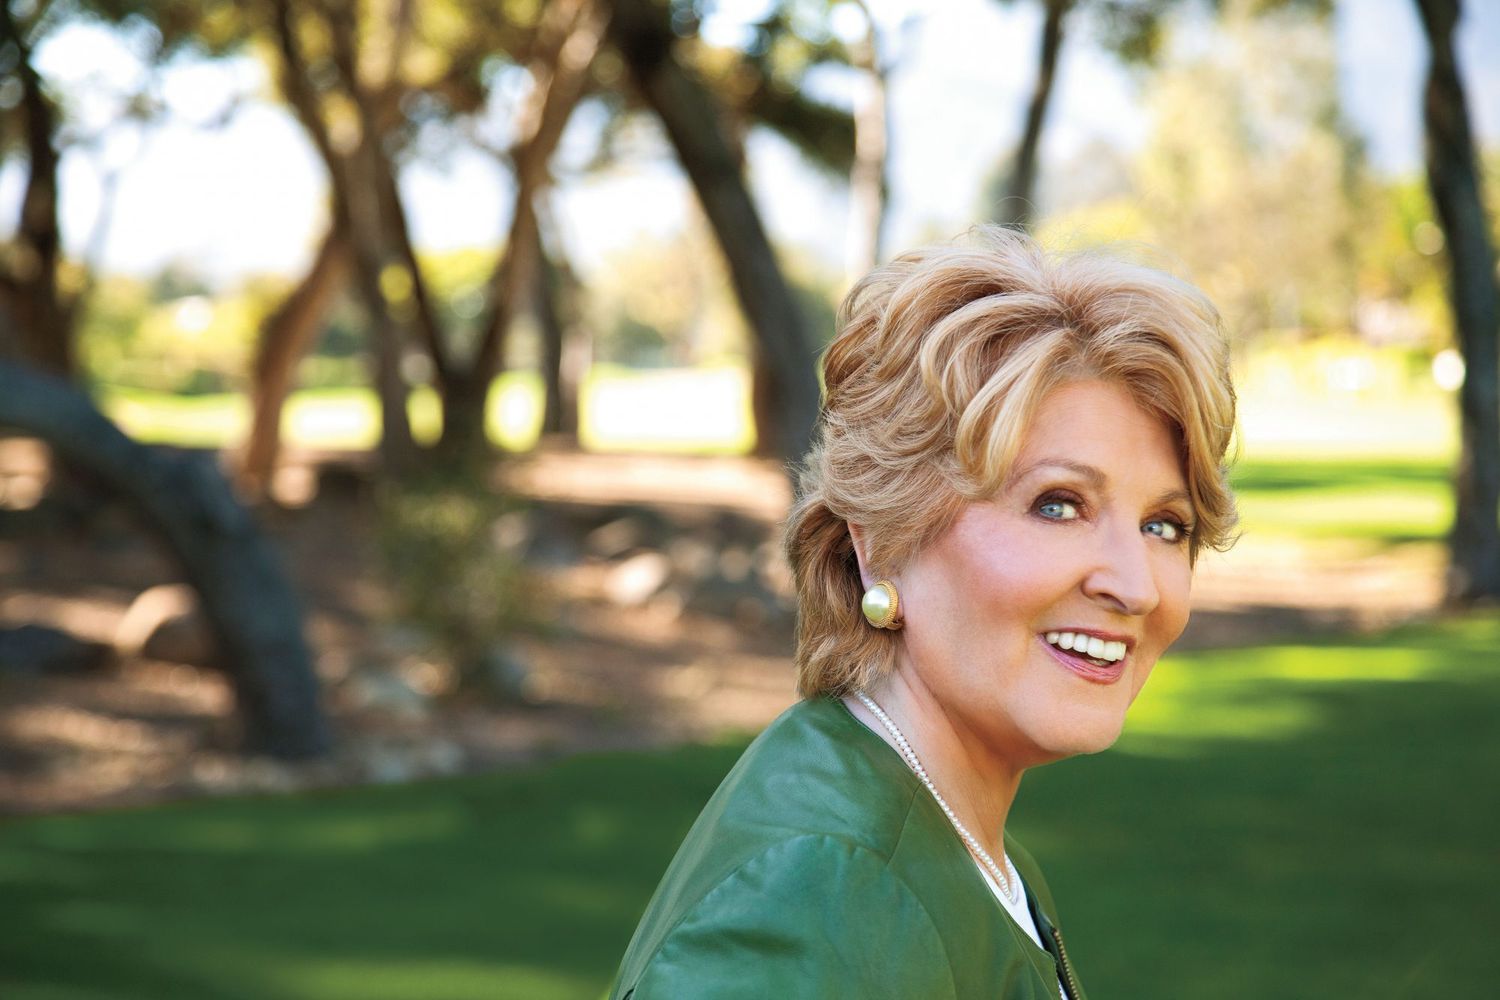 25 Surprising Facts About Fannie Flagg - Facts.net